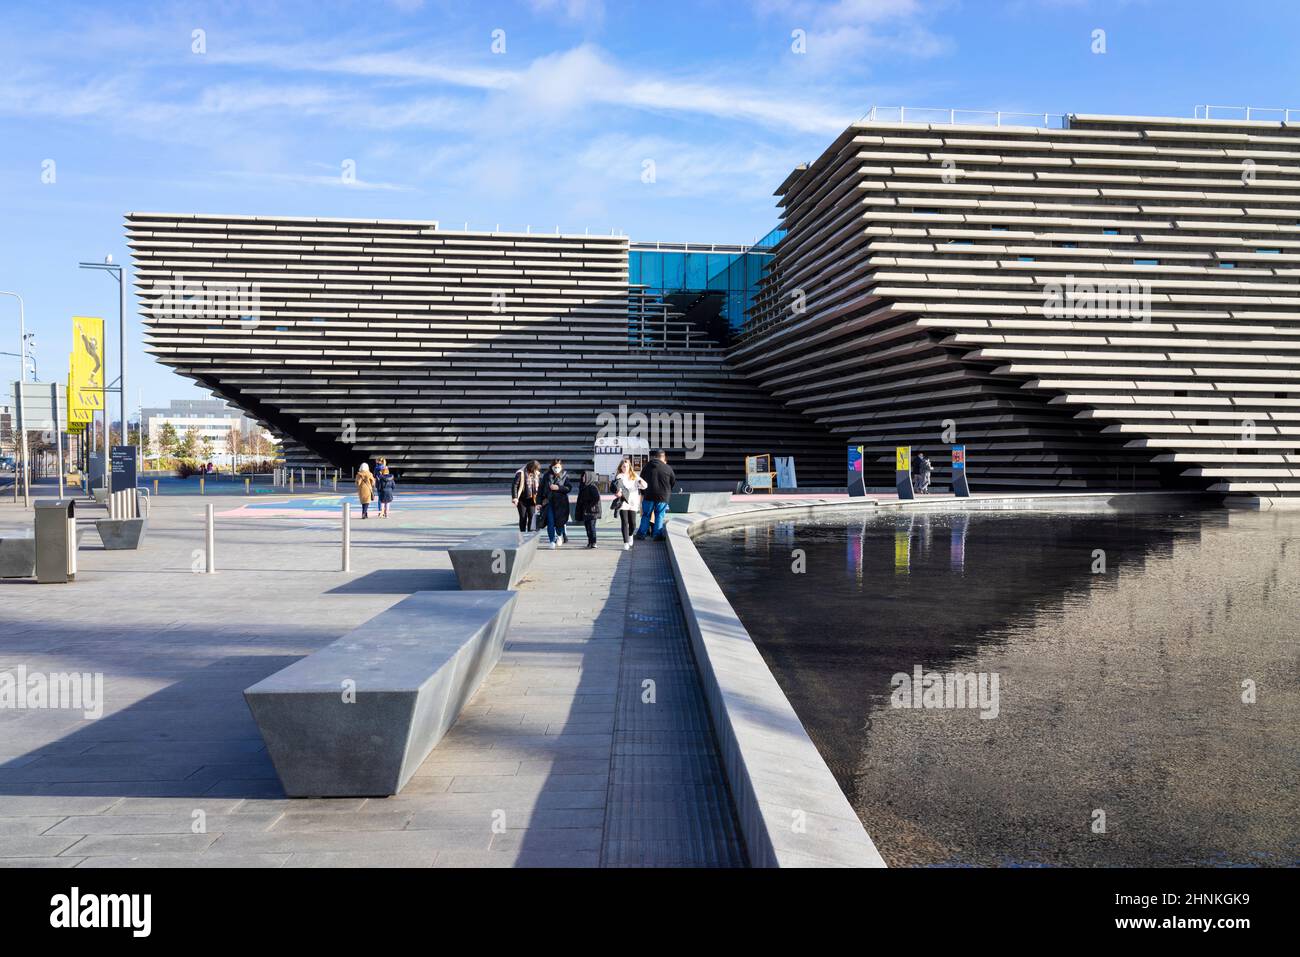 Dundee V&A Dundee Design Museum of Scotland Dundee Waterfront Dundee Riverside Esplanade Dundee Scotland GB Europe Foto Stock